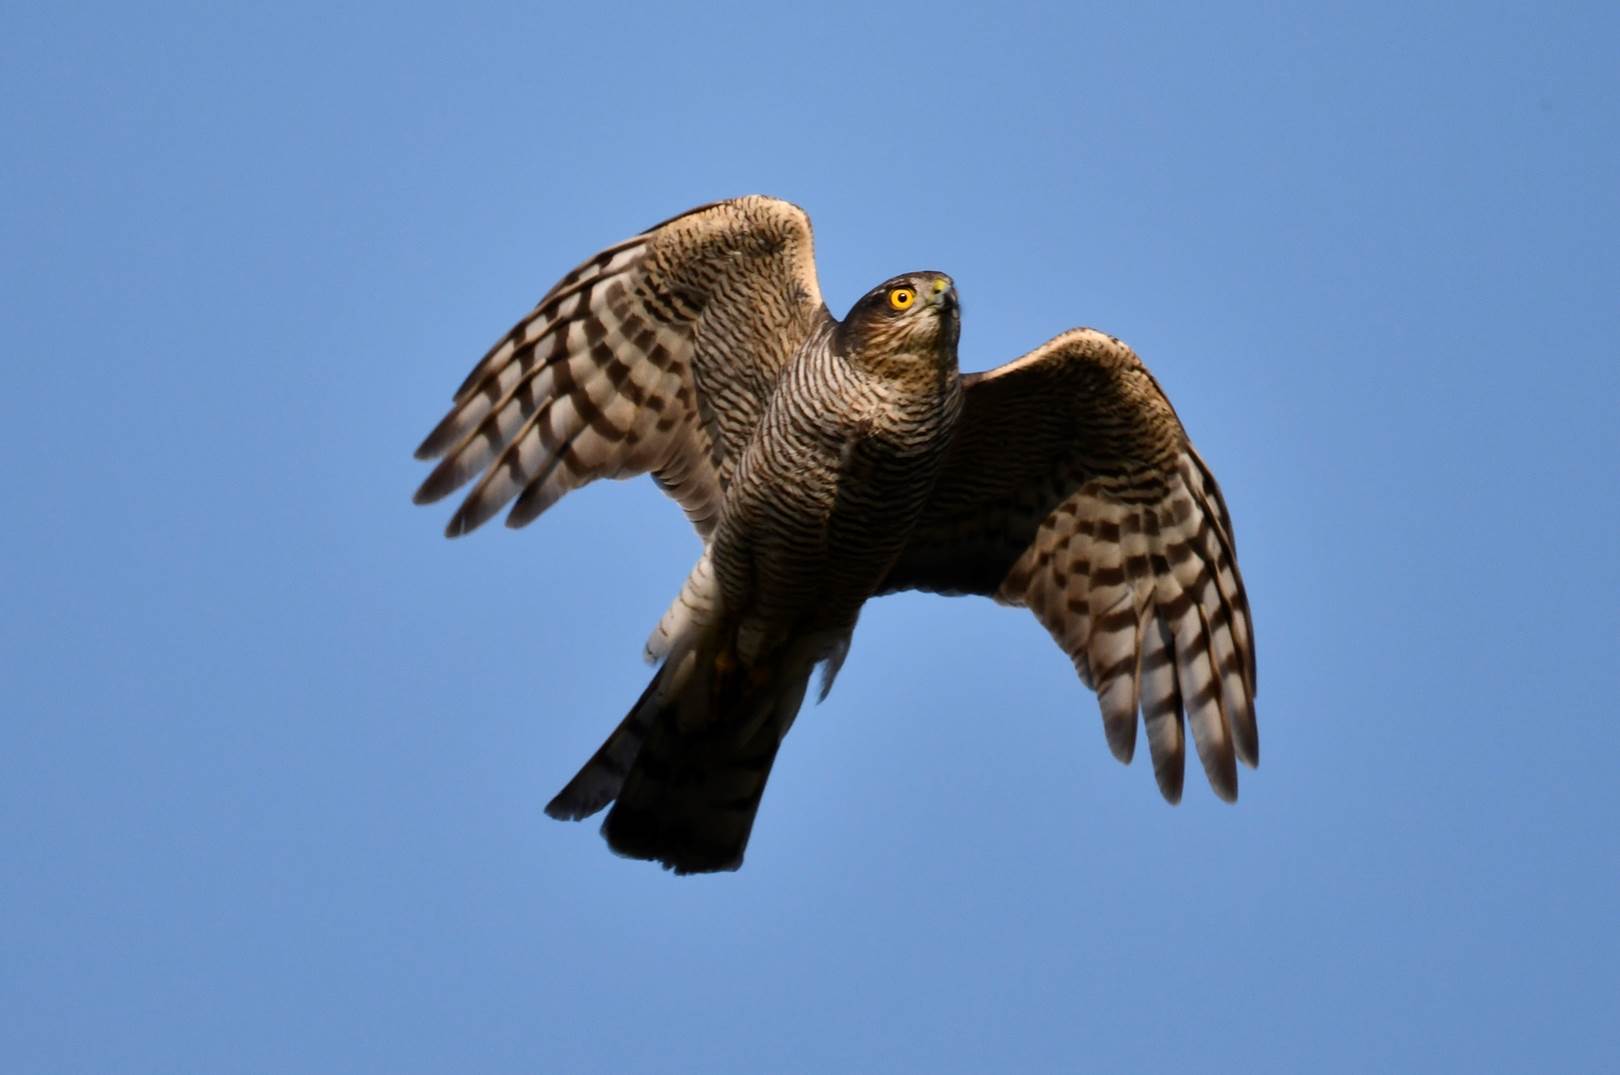 A hawk flying in the sky

Description automatically generated